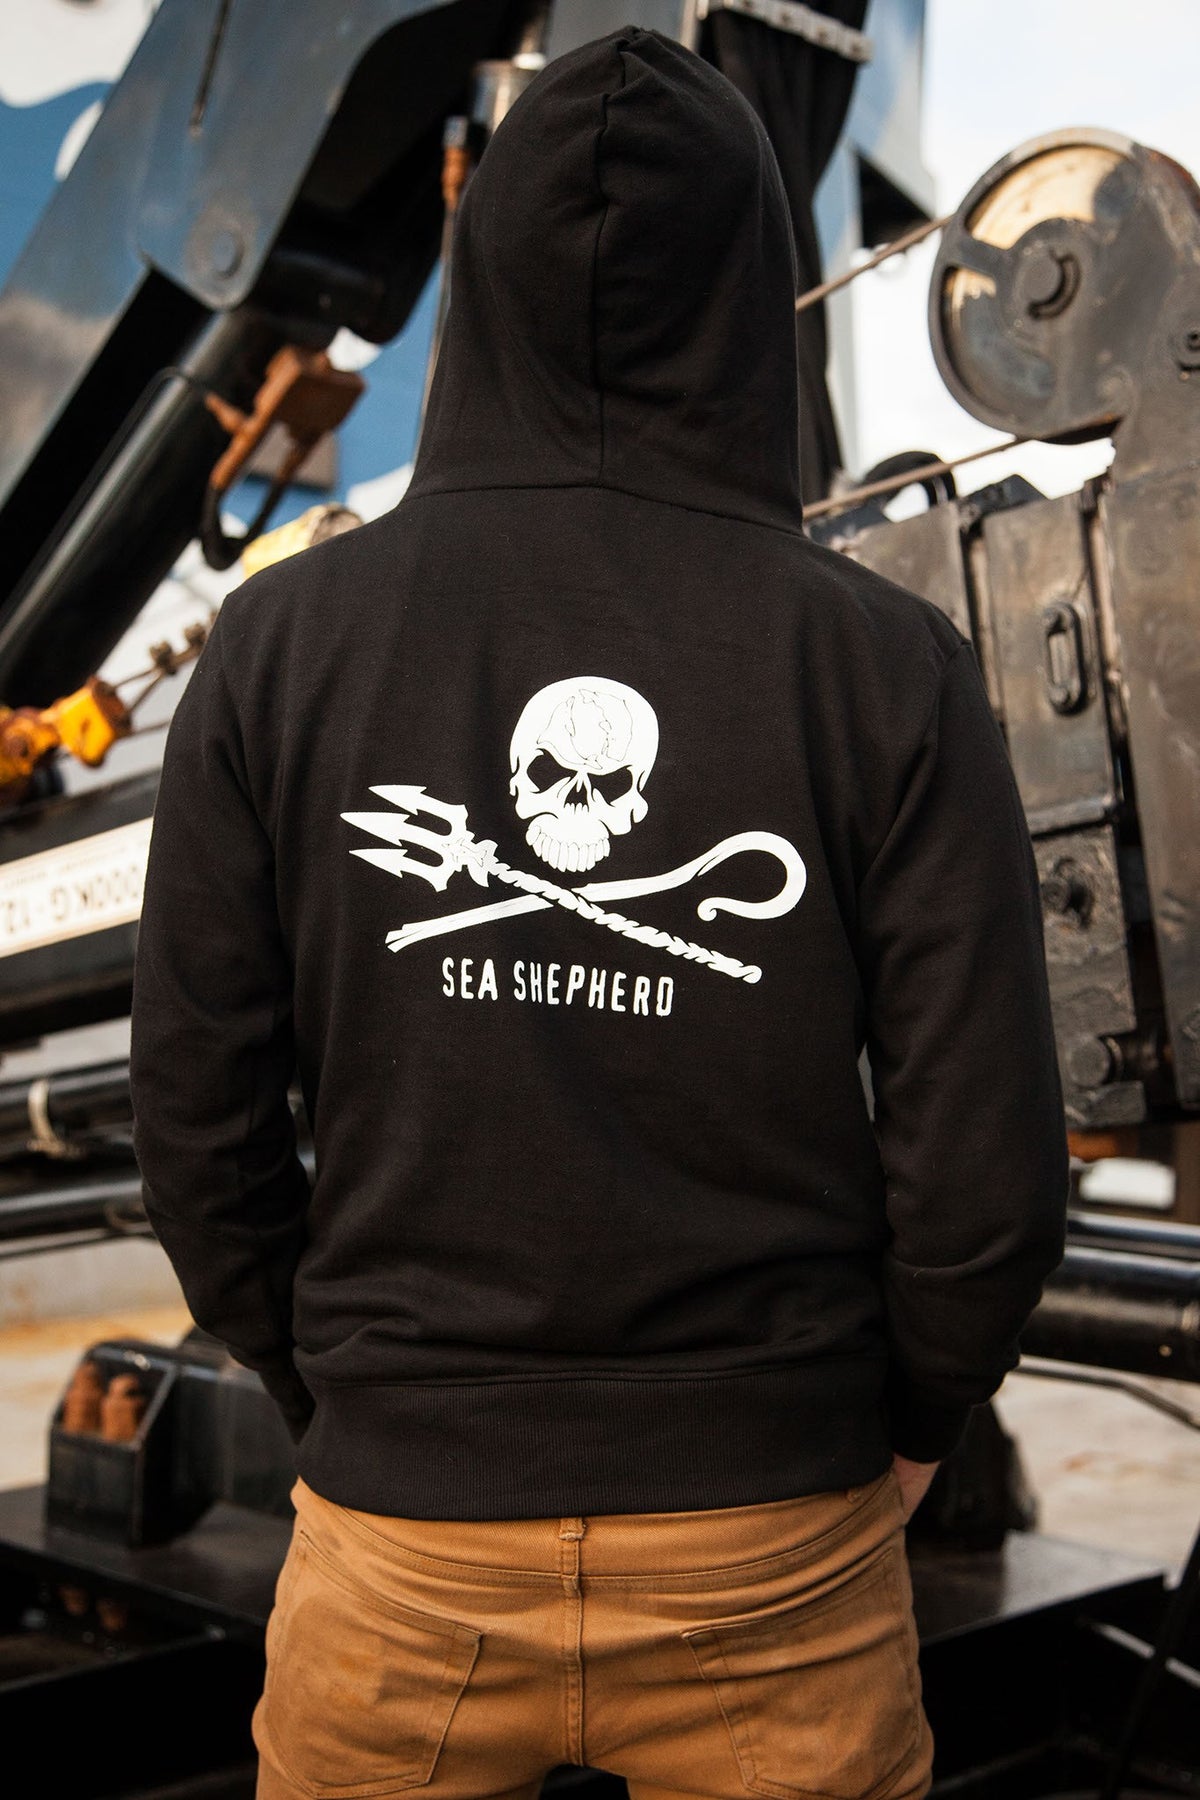 official one piece jolly roger hoodie